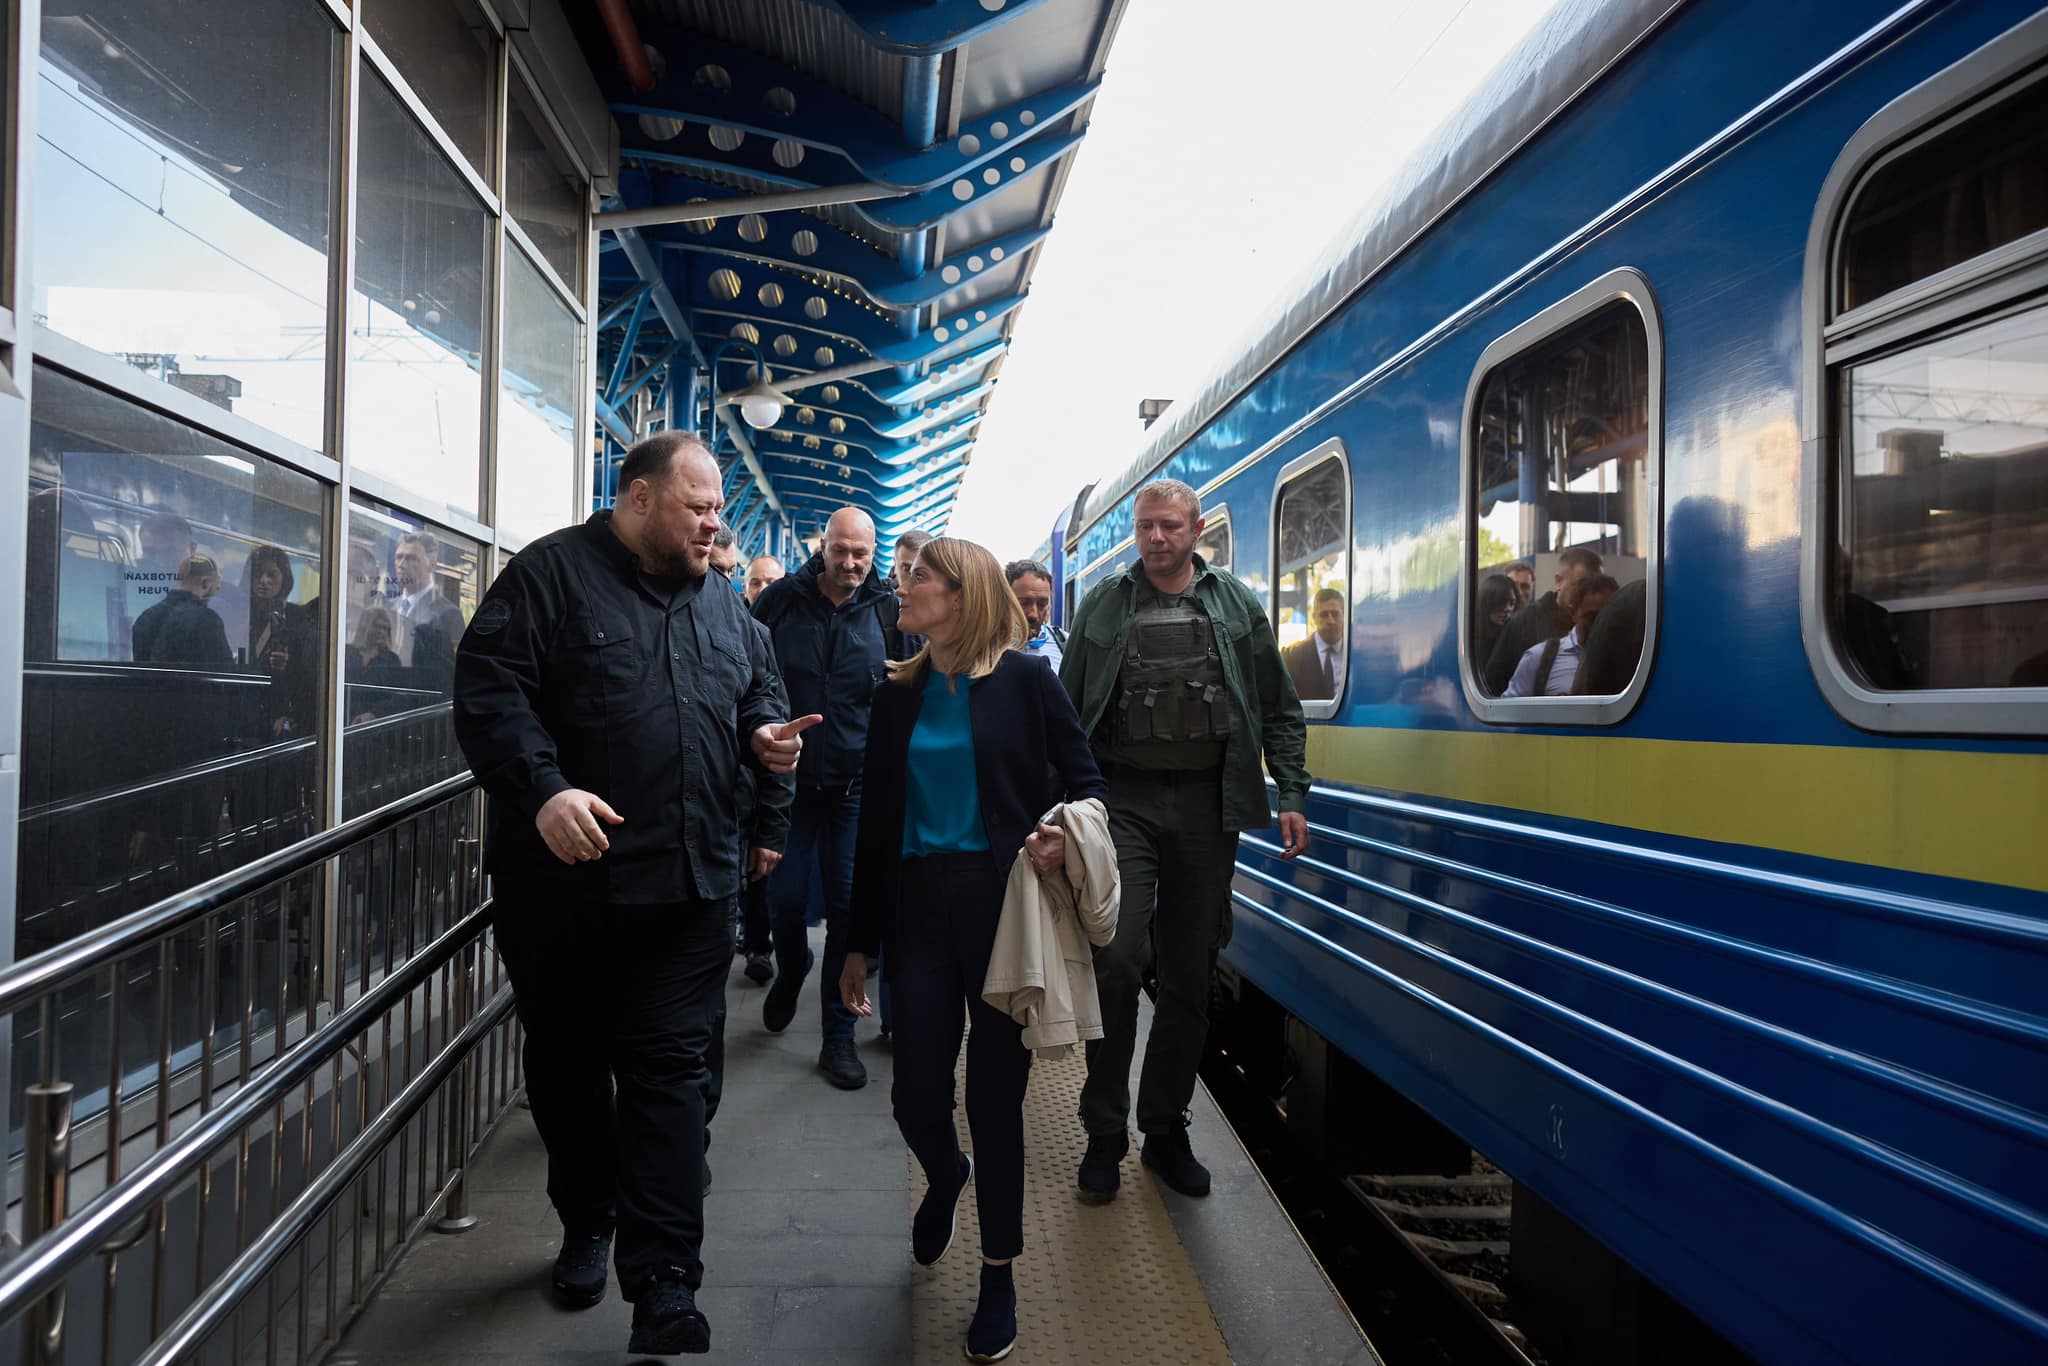 President of the European Parliament, Roberta Metsola, has arrived in Kyiv